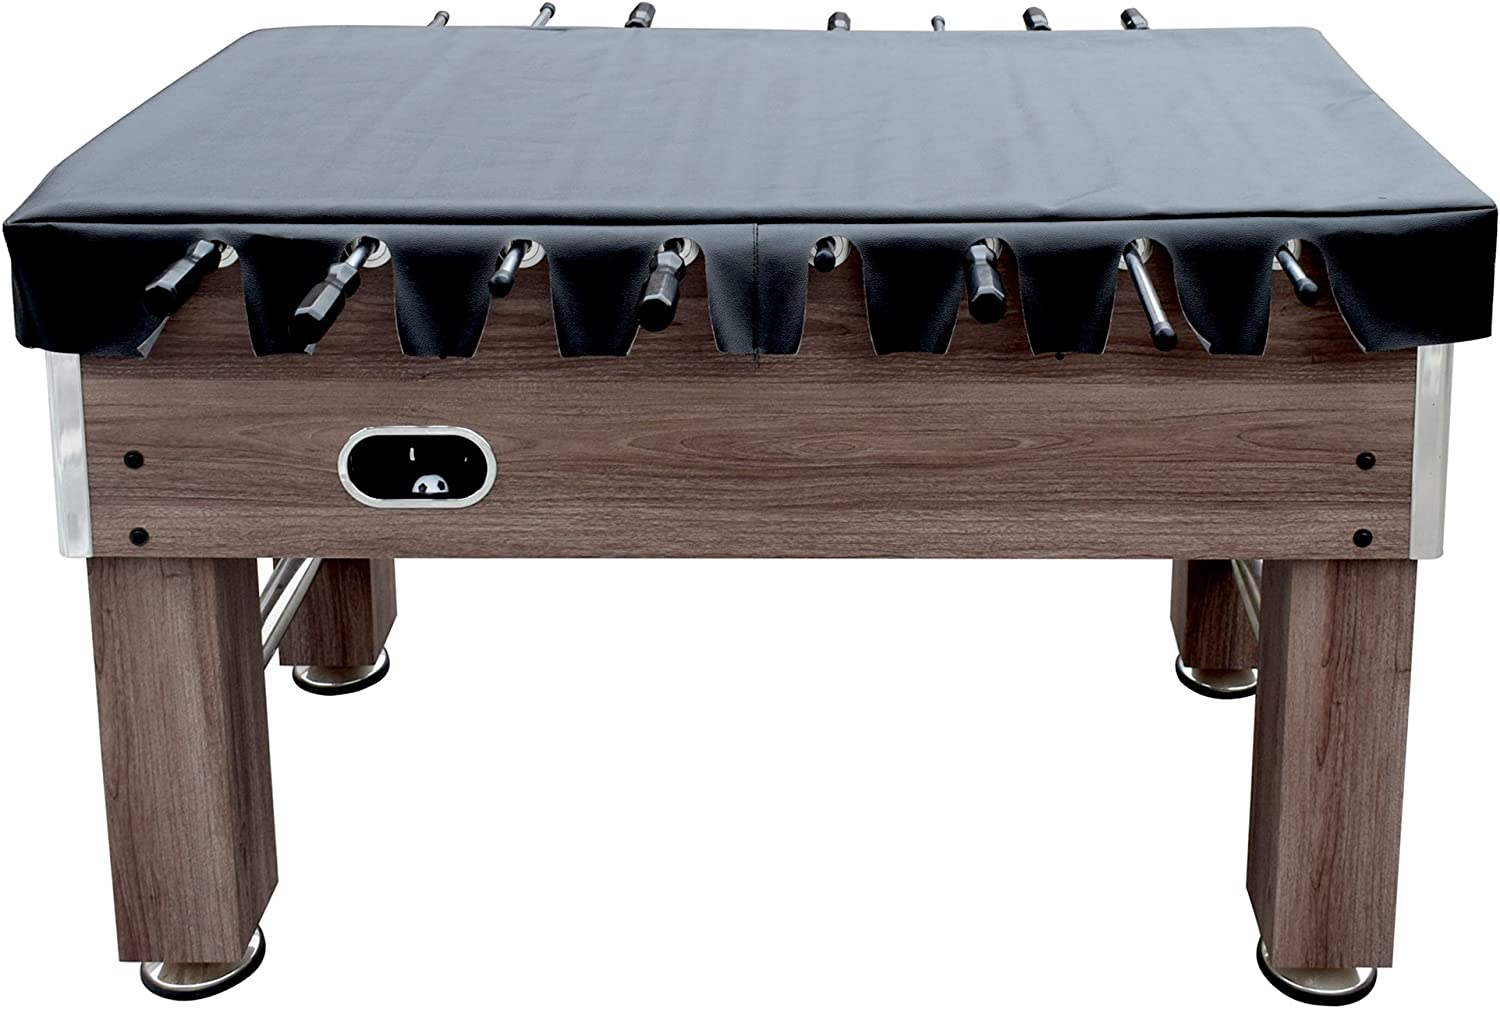 Hathaway Foosball Table Cover - Fits 54-in Table Black